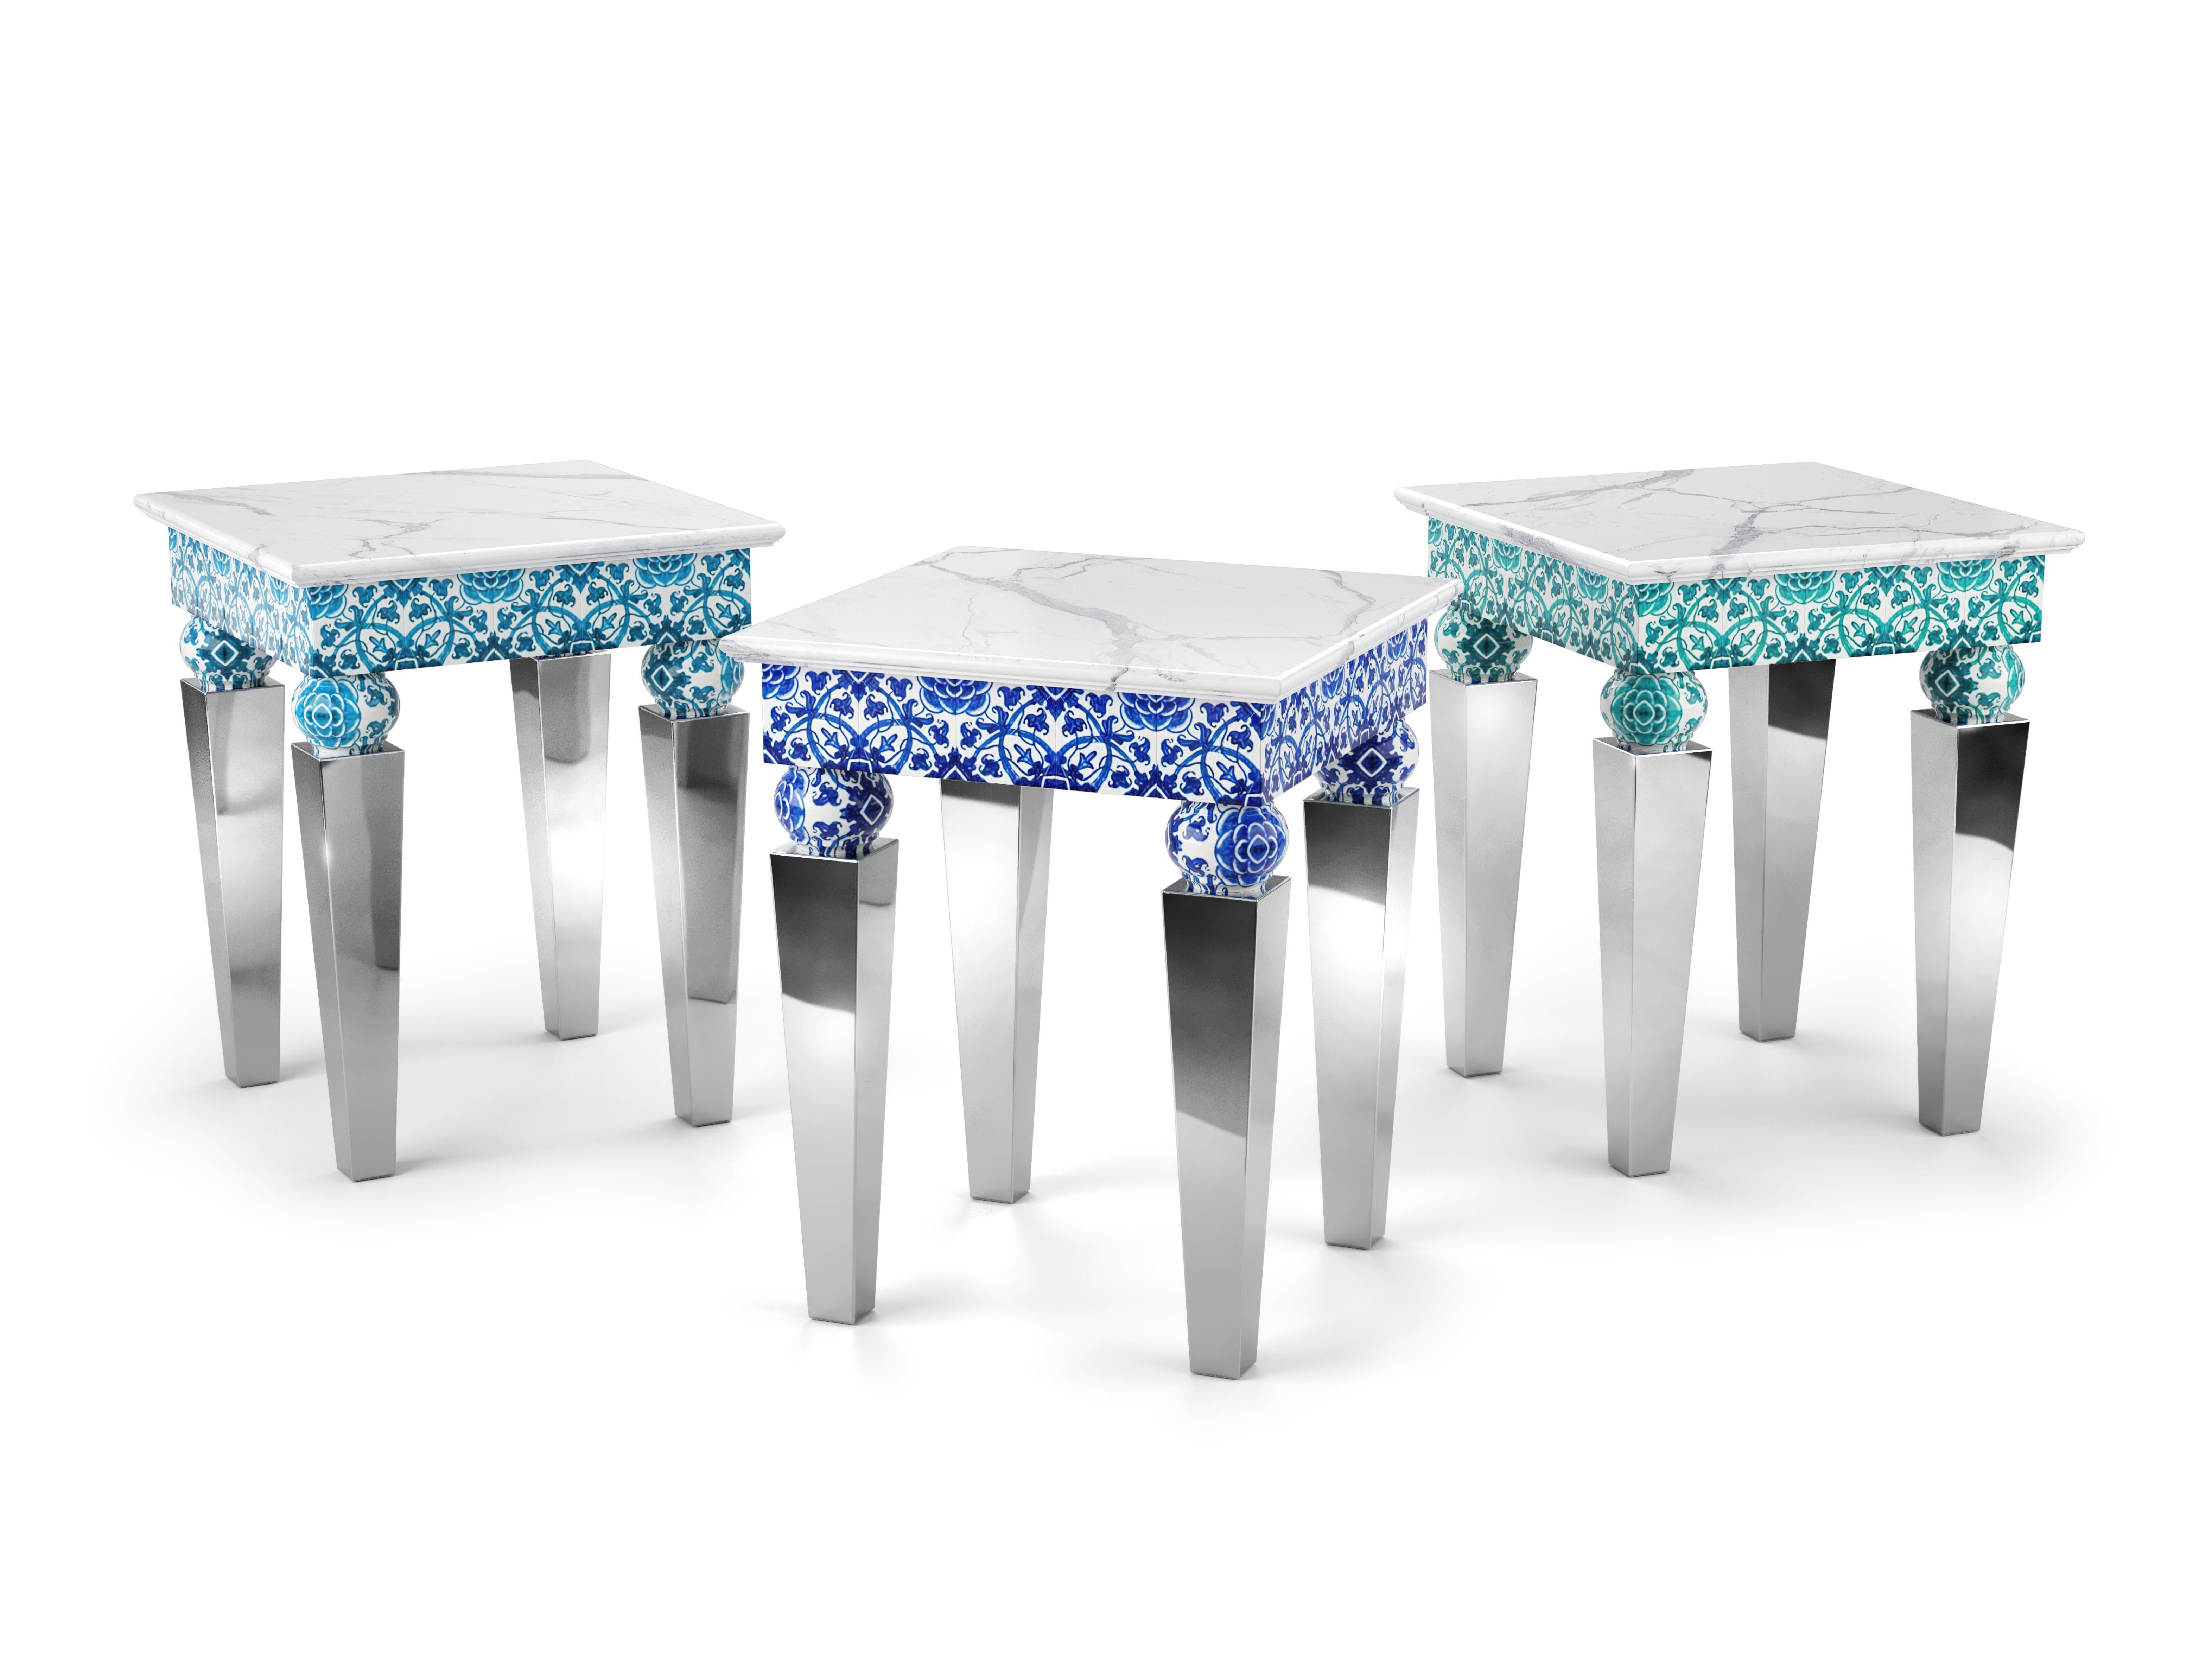 Italian Two Side Tables, White Marble, Mirror Steel, Blue Majolica Tiles, Also Outdoor For Sale